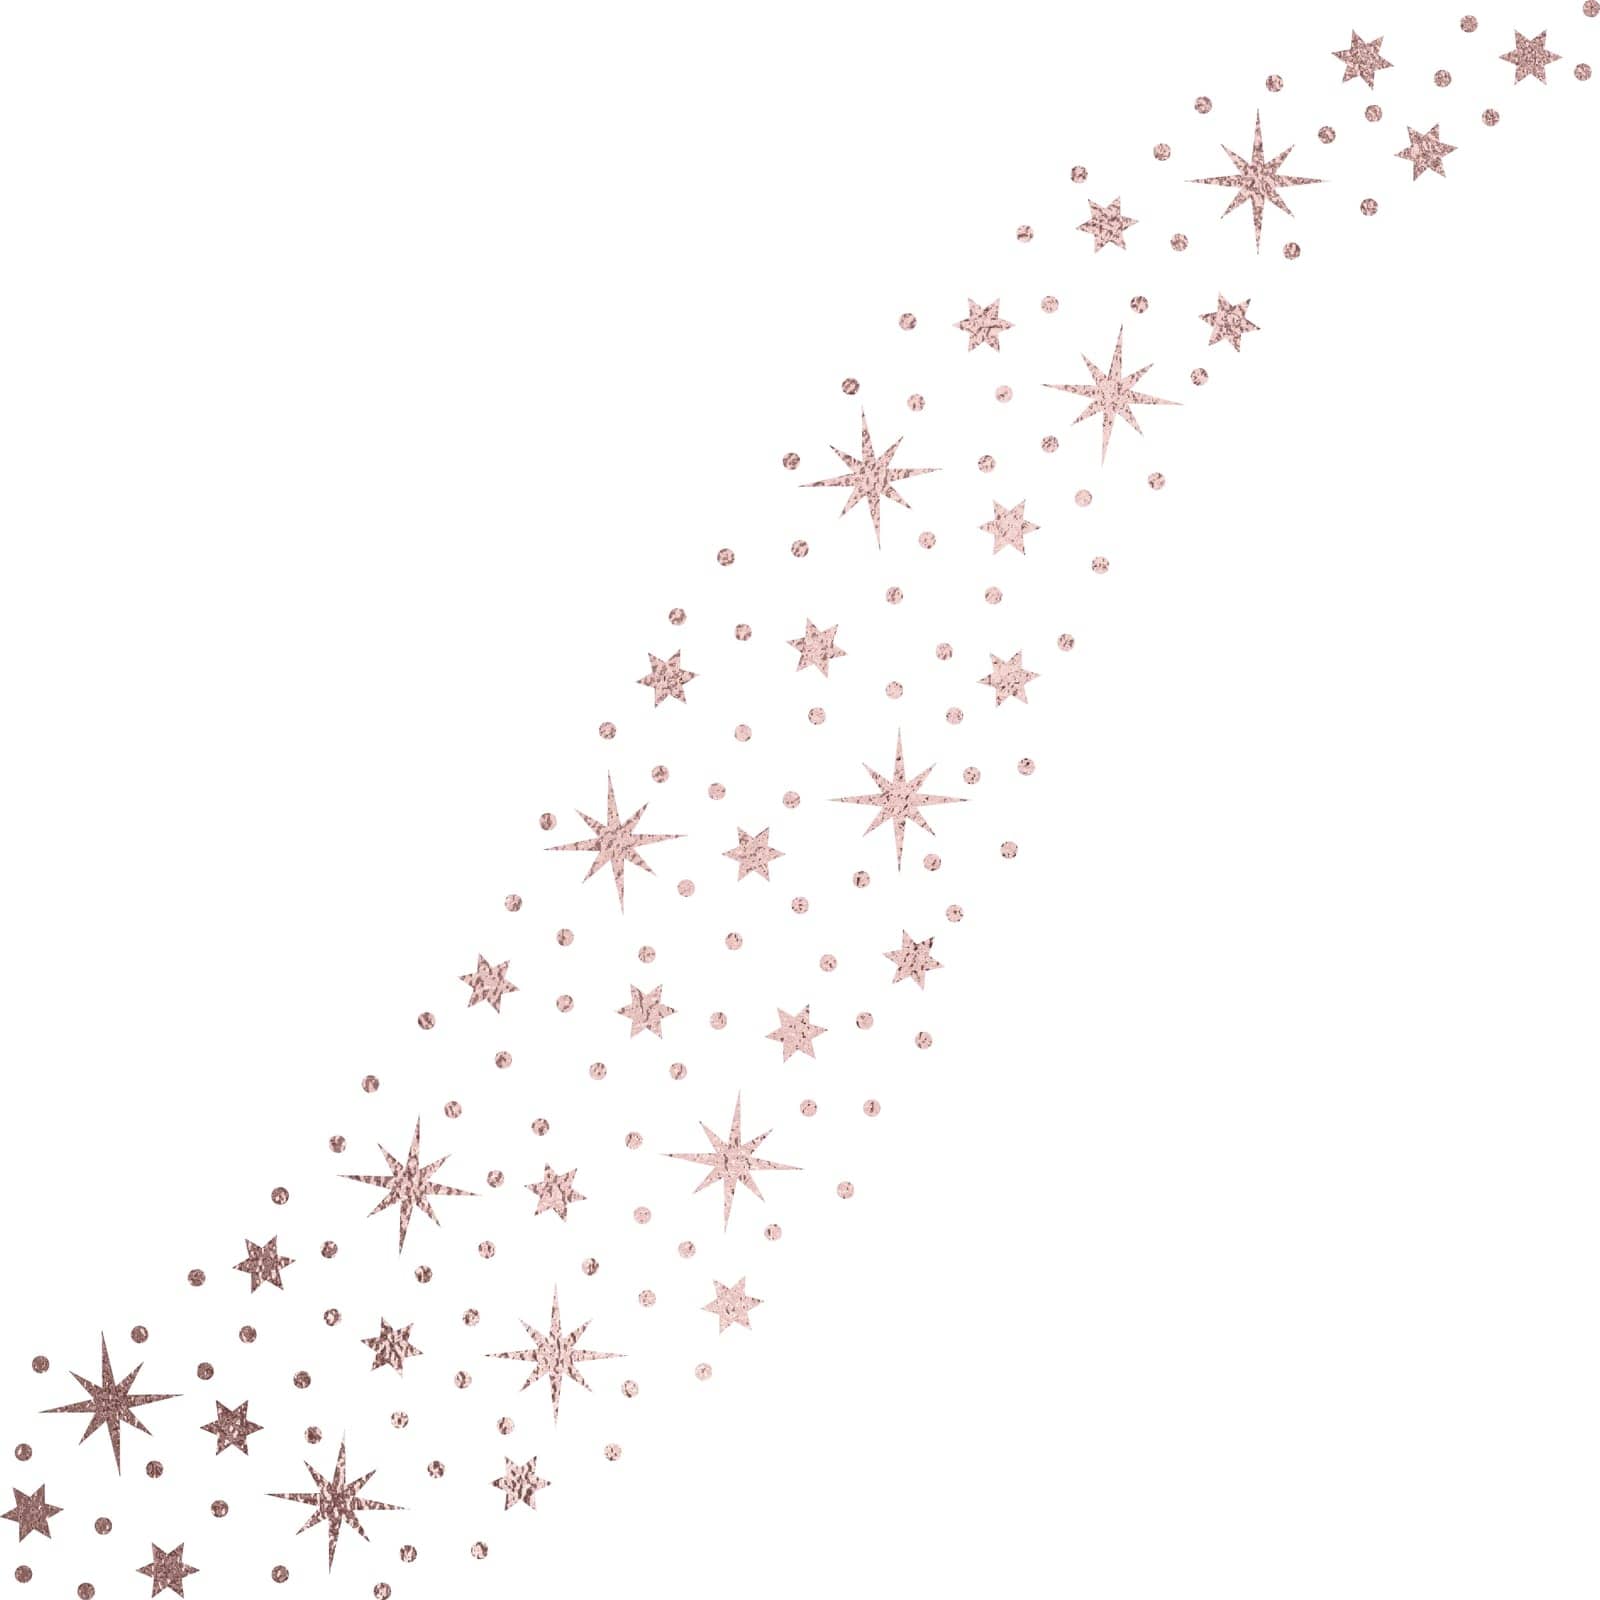 Rose golden star tail with transparent background